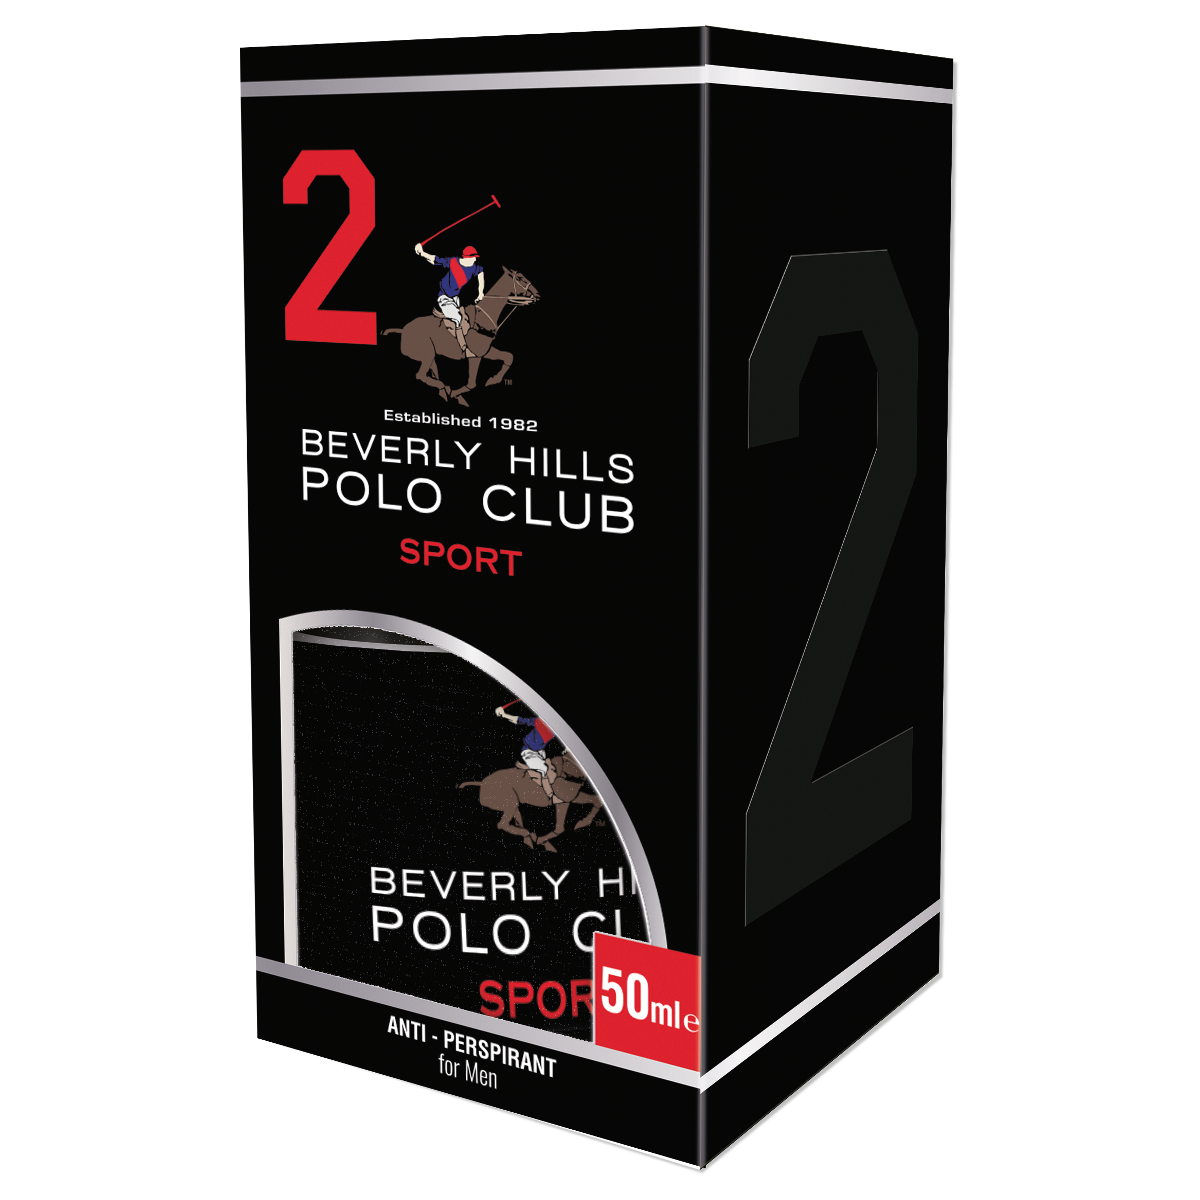 42 Beverly Hills Polo Club Images, Stock Photos, 3D objects, & Vectors